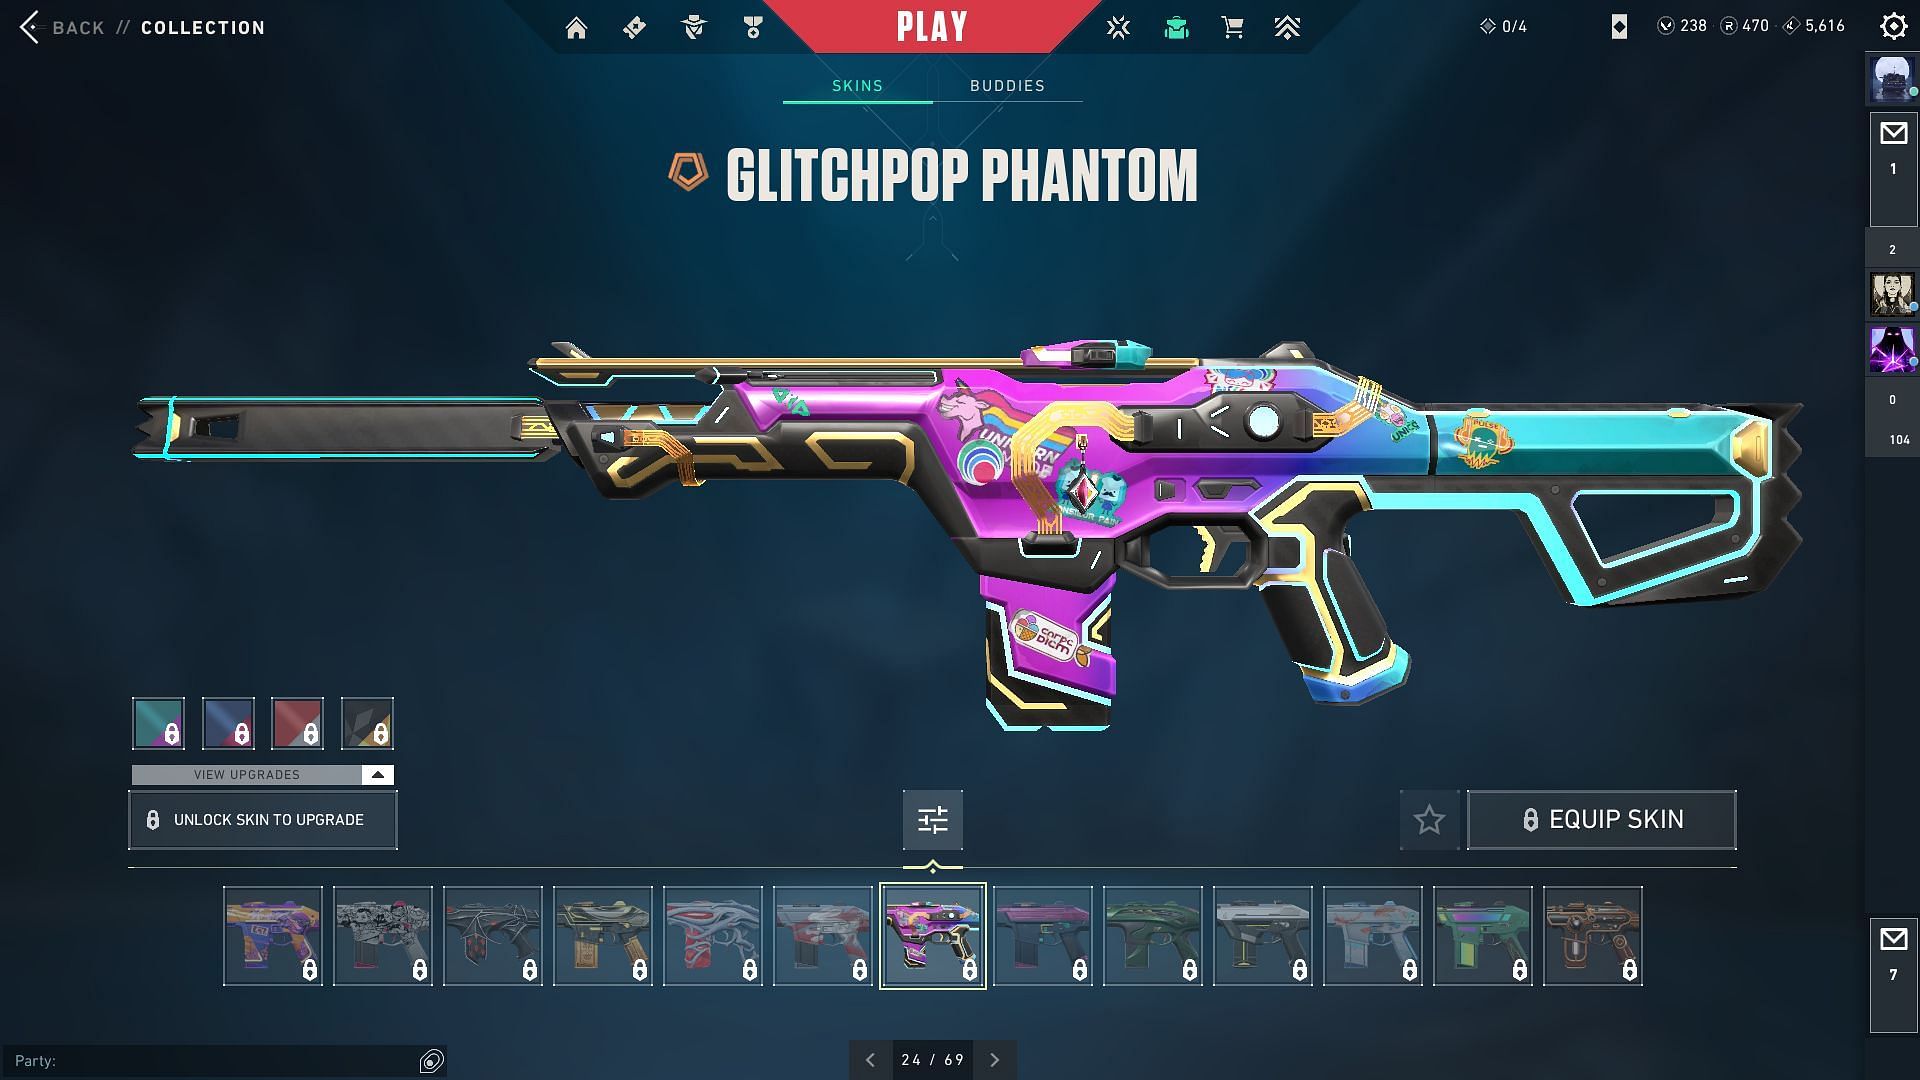 Phantom is a main rifle in the game Valorant.